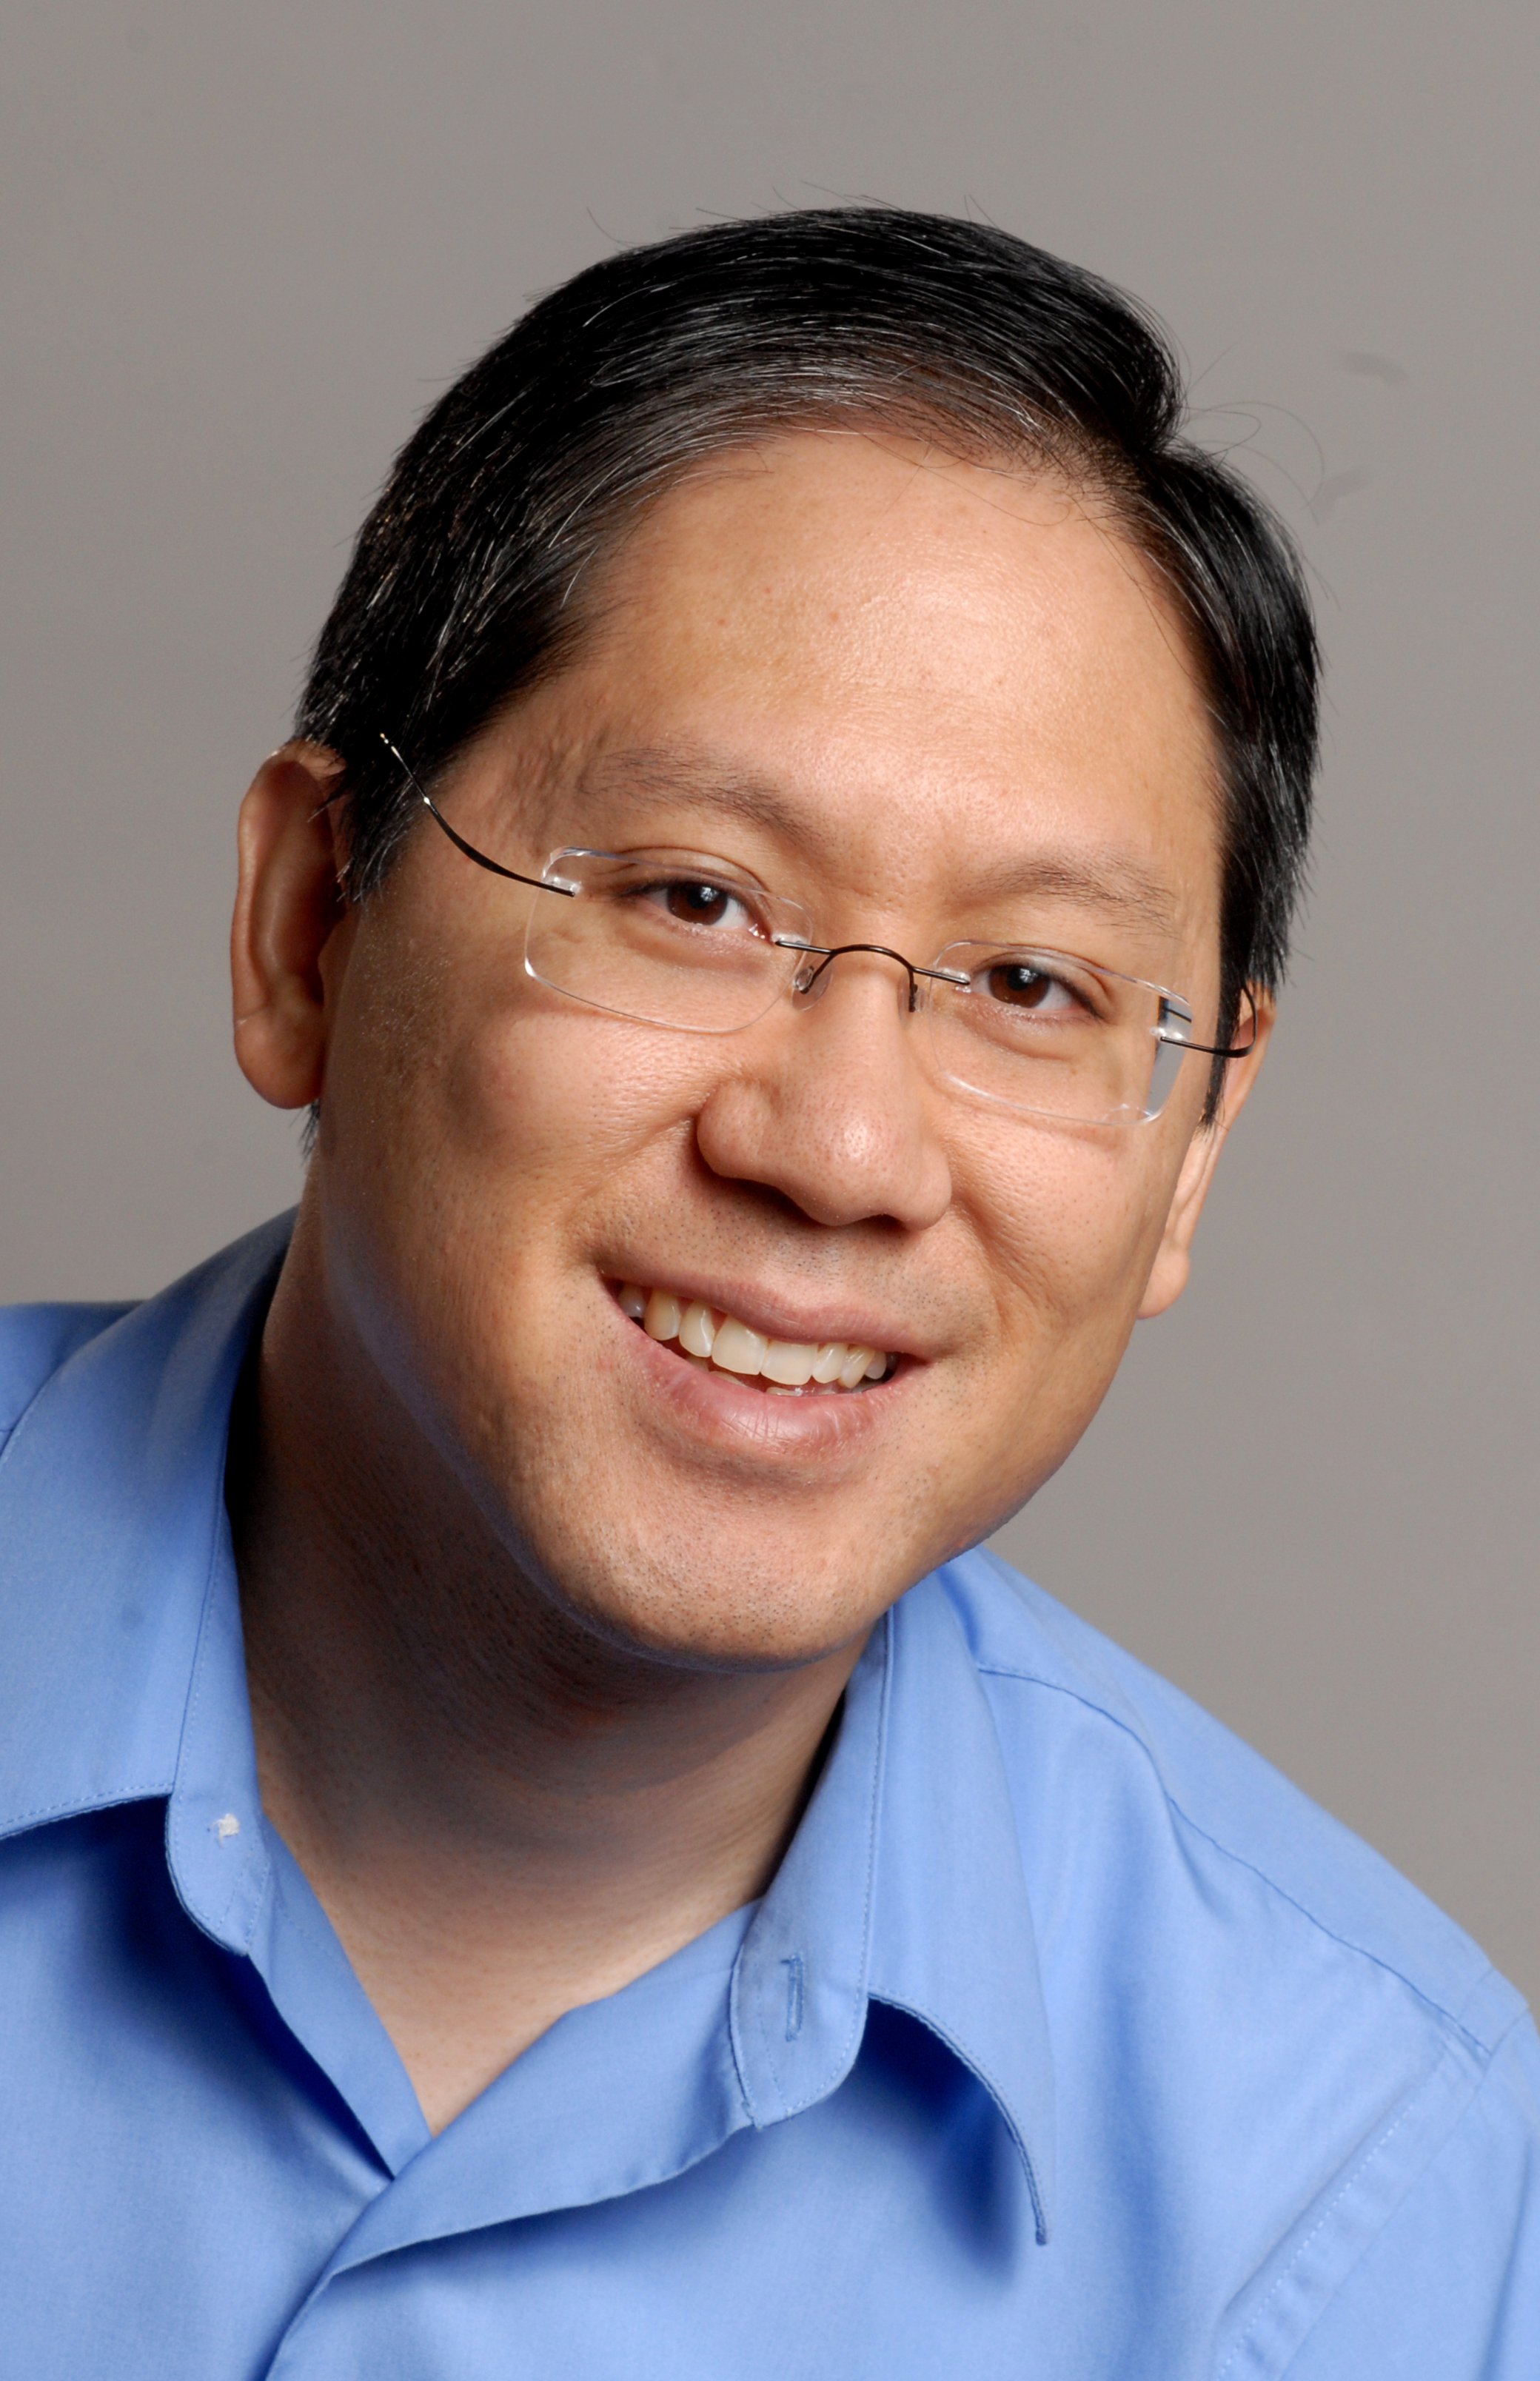 Headshot of Clark against a neutral gray background, leaning to his left wearing glasses and a blue shirt.